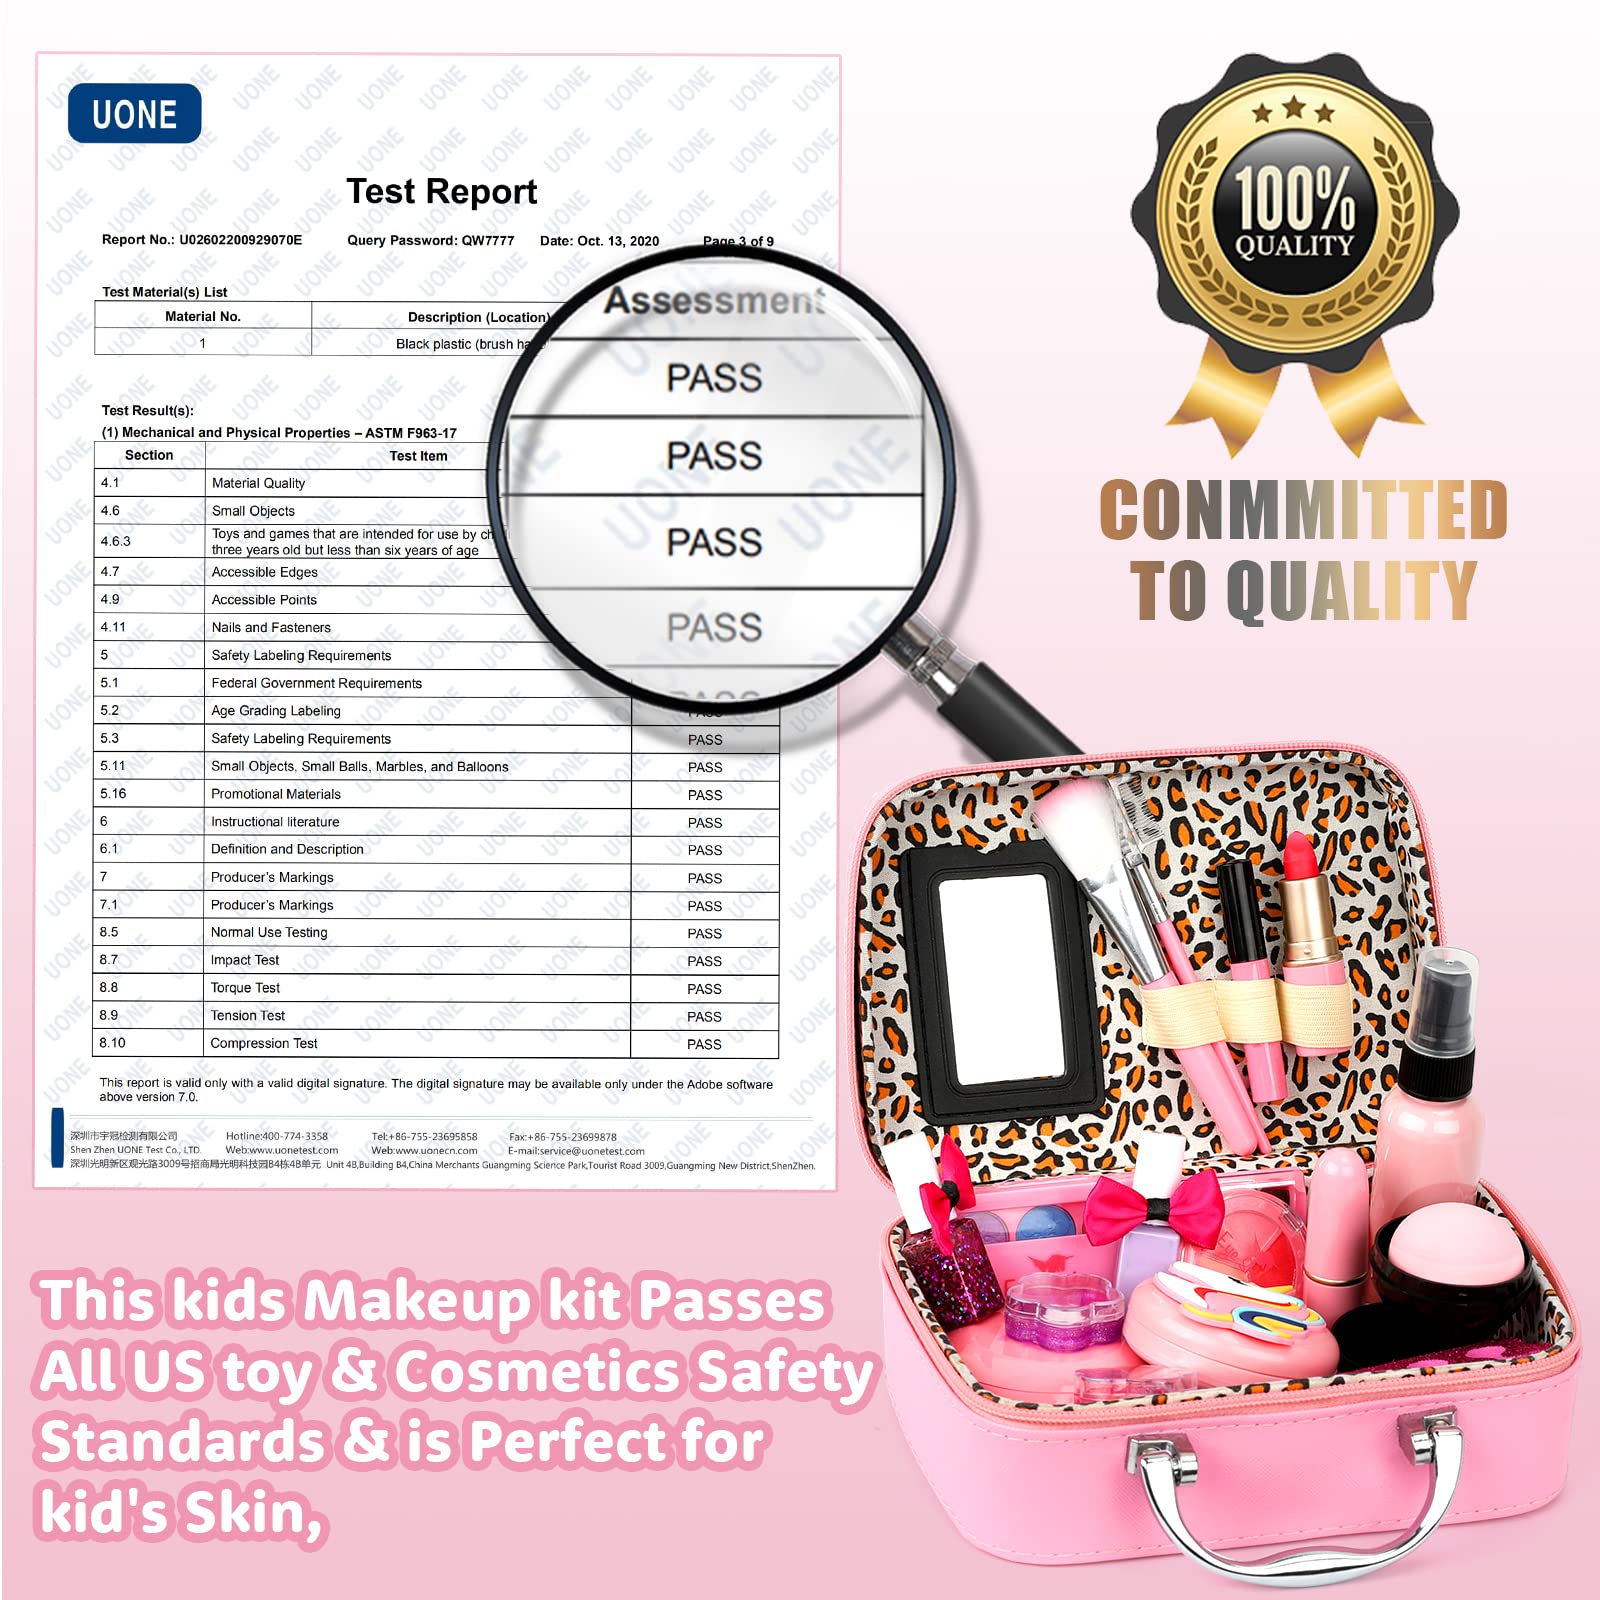 Kids Makeup Kit for Girls, Real Washable Makeup Set for Girls, Makeup for Kids, Girl Toys Princess Children Play Makeup Kit with Cosmetic Case Christmas Birthday Gifts for 4 5 6 7 8 Years Old Girls